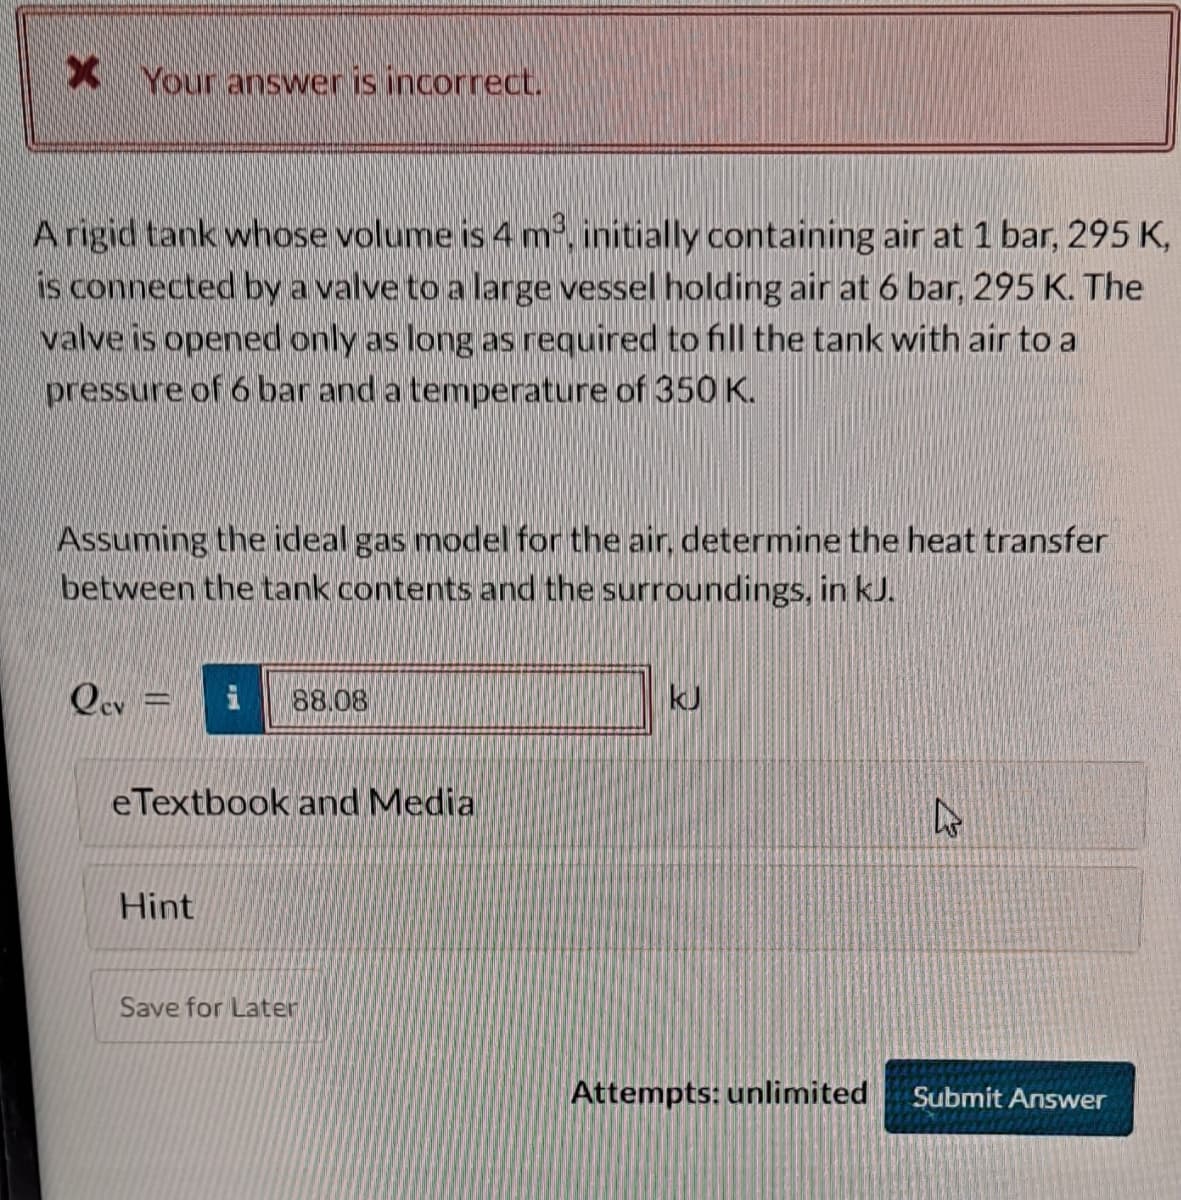 X Your answer is incorrect.
A rigid tank whose volume is 4 m³, initially containing air at 1 bar, 295 K,
is connected by a valve to a large vessel holding air at 6 bar, 295 K. The
valve is opened only as long as required to fill the tank with air to a
pressure of 6 bar and a temperature of 350 K.
Assuming the ideal gas model for the air, determine the heat transfer
between the tank contents and the surroundings, in kJ.
Qev =
i 88.08
eTextbook and Media
Hint
Save for Later
kJ
Attempts: unlimited
4
Submit Answer